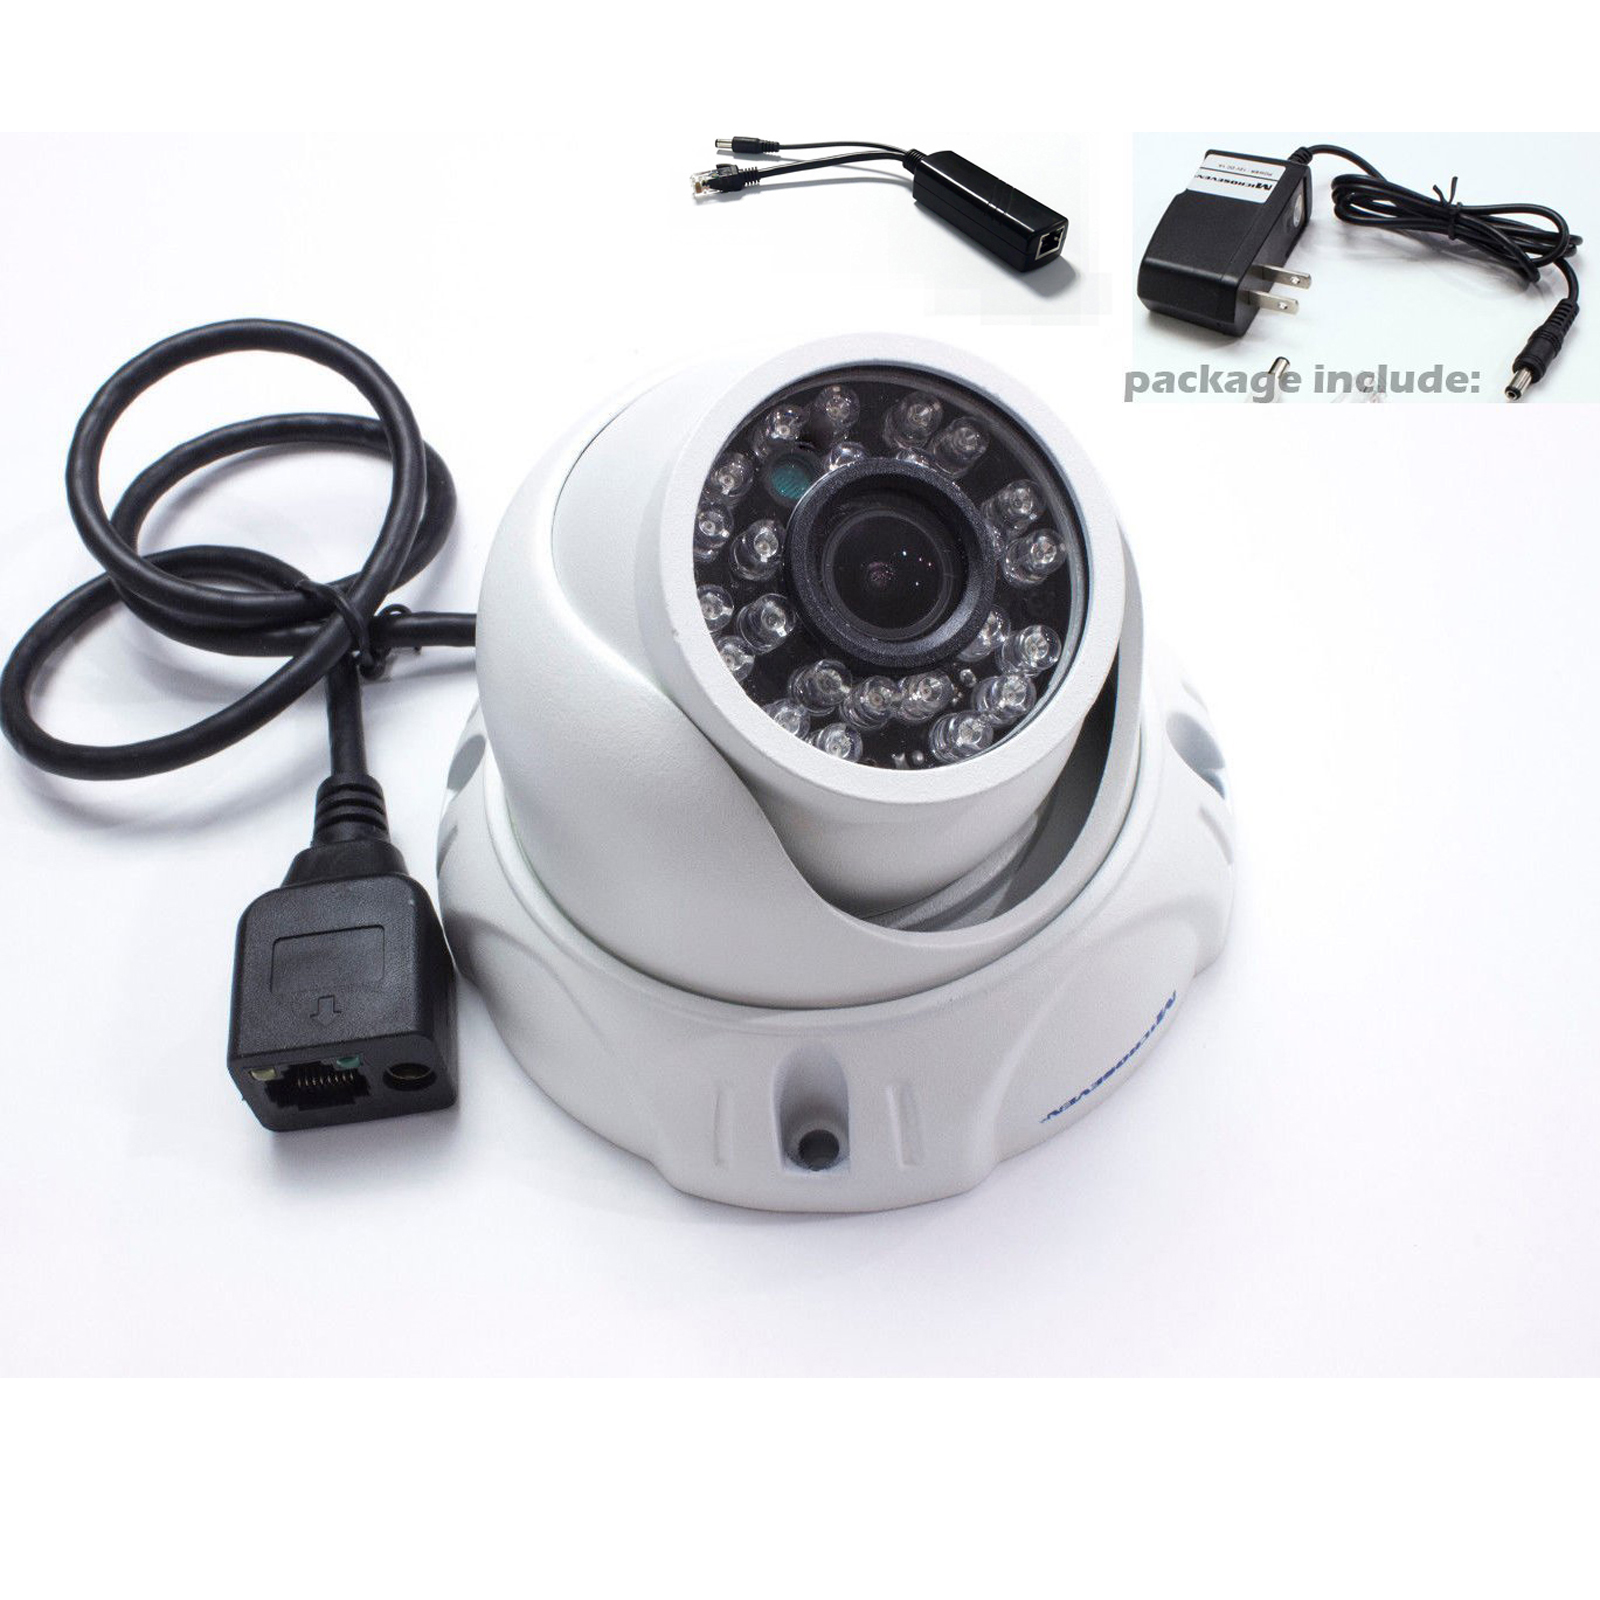 Microseven Open Source HD 960p 1/3" Aptina CMOS 3MP 2.8mm Lens Wide Angle Plug and Play IP Dome Camera IR Indoor / Outdoor-Compatible with Onvif NVR, Free Cloud and Free Live Streaming on microseven.tv + POE Splitter